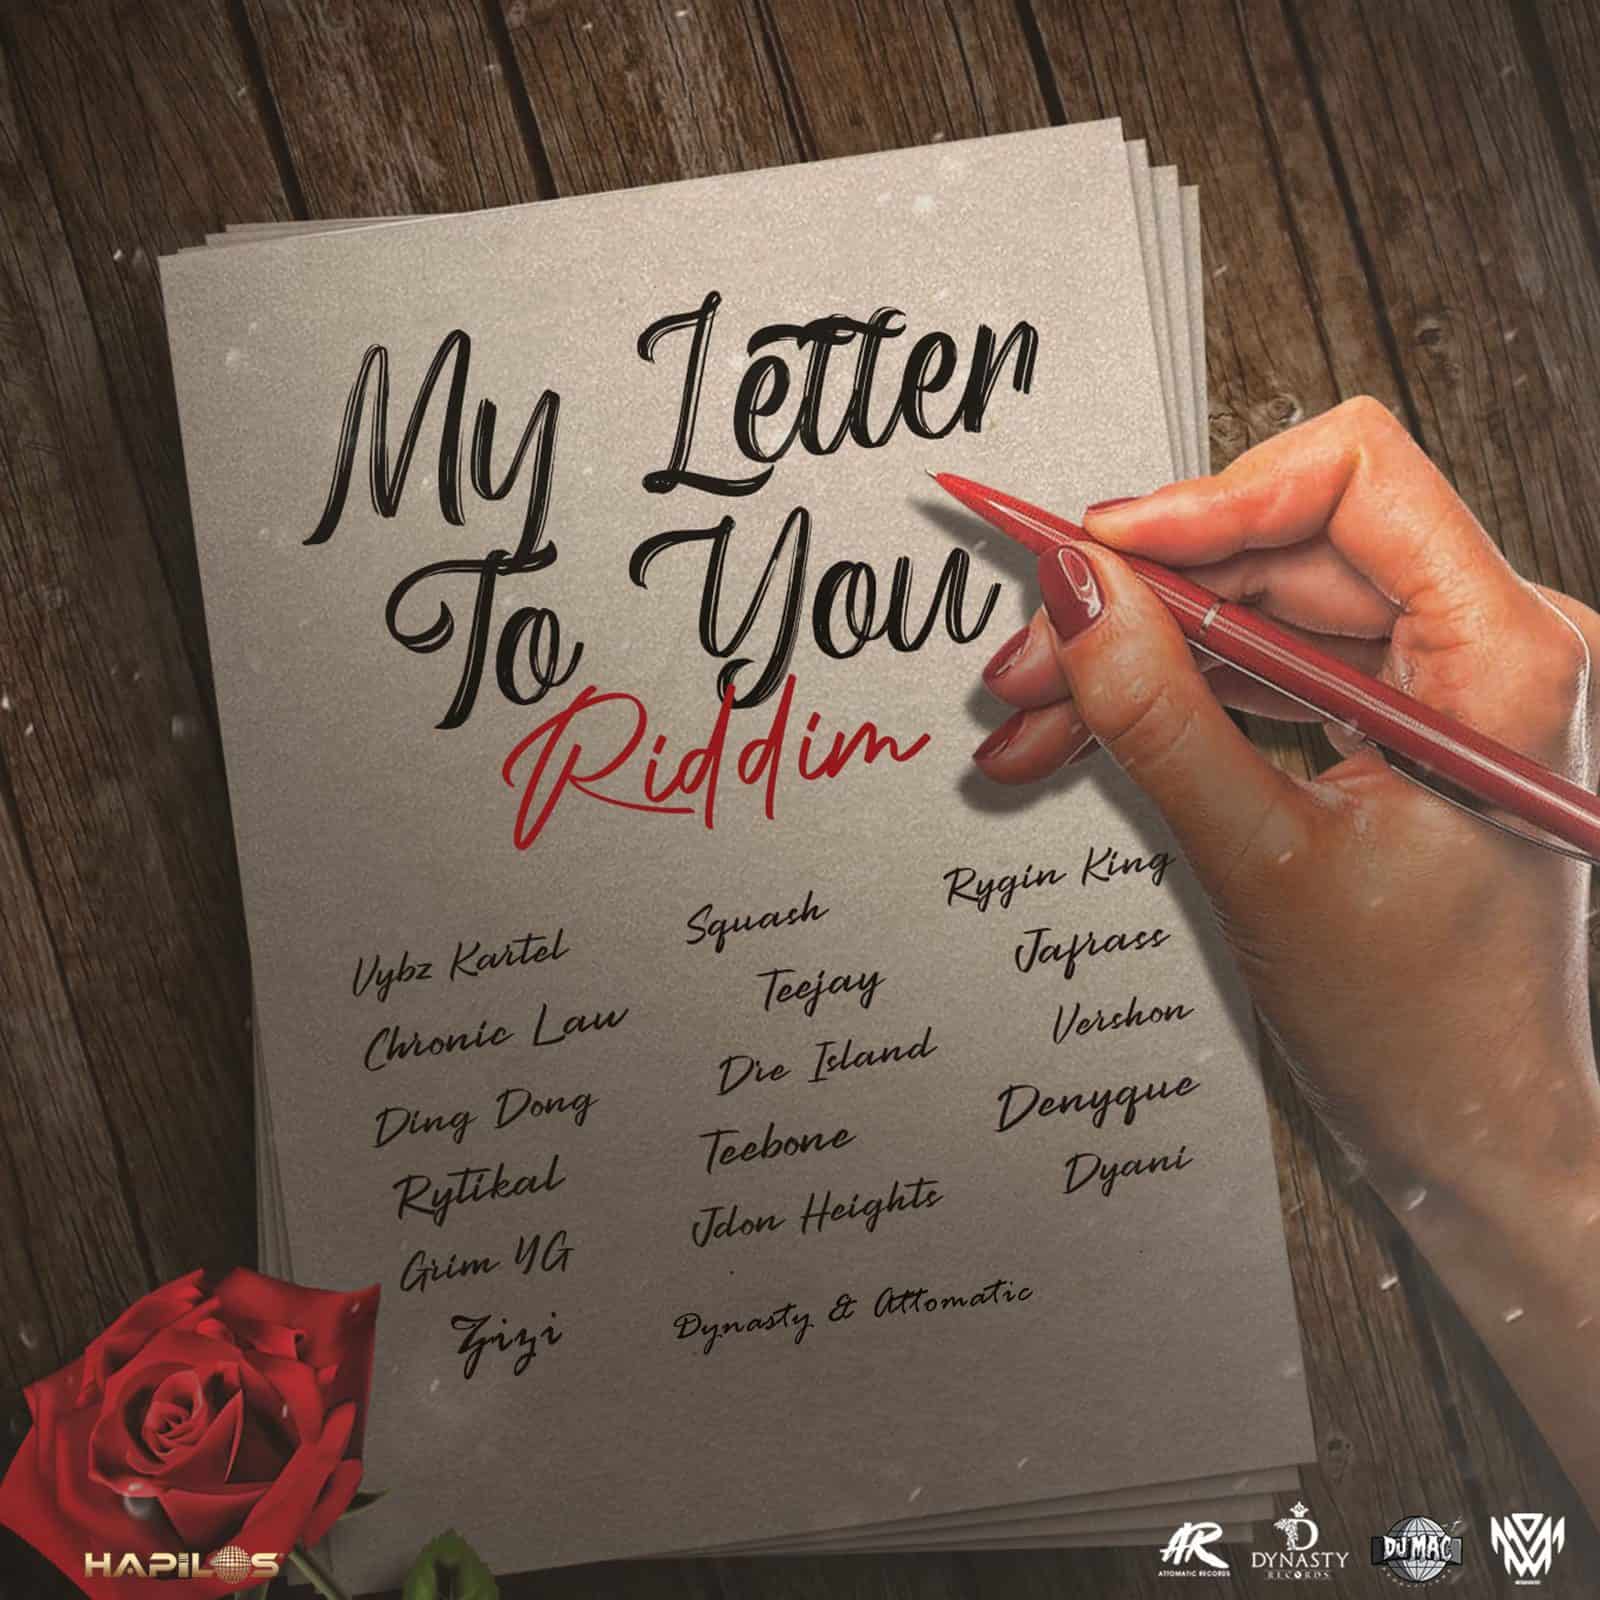 My Letter to You Riddim - Dynasty Entertainment / Attomatic Records